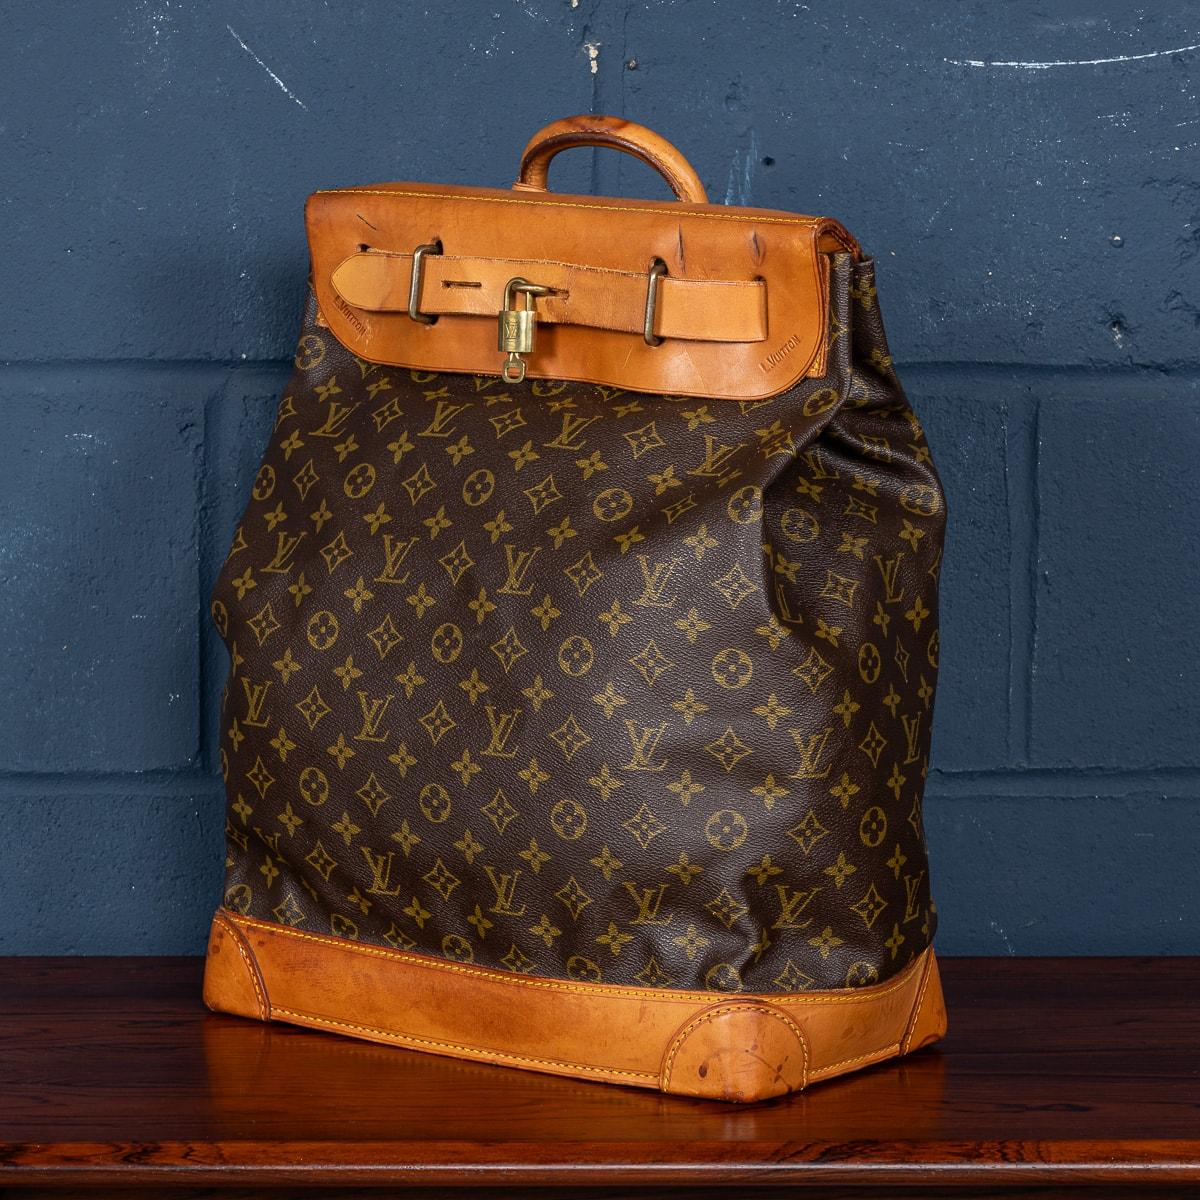 A lovely Louis Vuitton steamer travel bag in monogram canvas and natural tan leather, made in France in the latter quarter of the 20th century. Steamer bags have been produced by Louis Vuitton for over 120 years. In 1901, the company introduced the